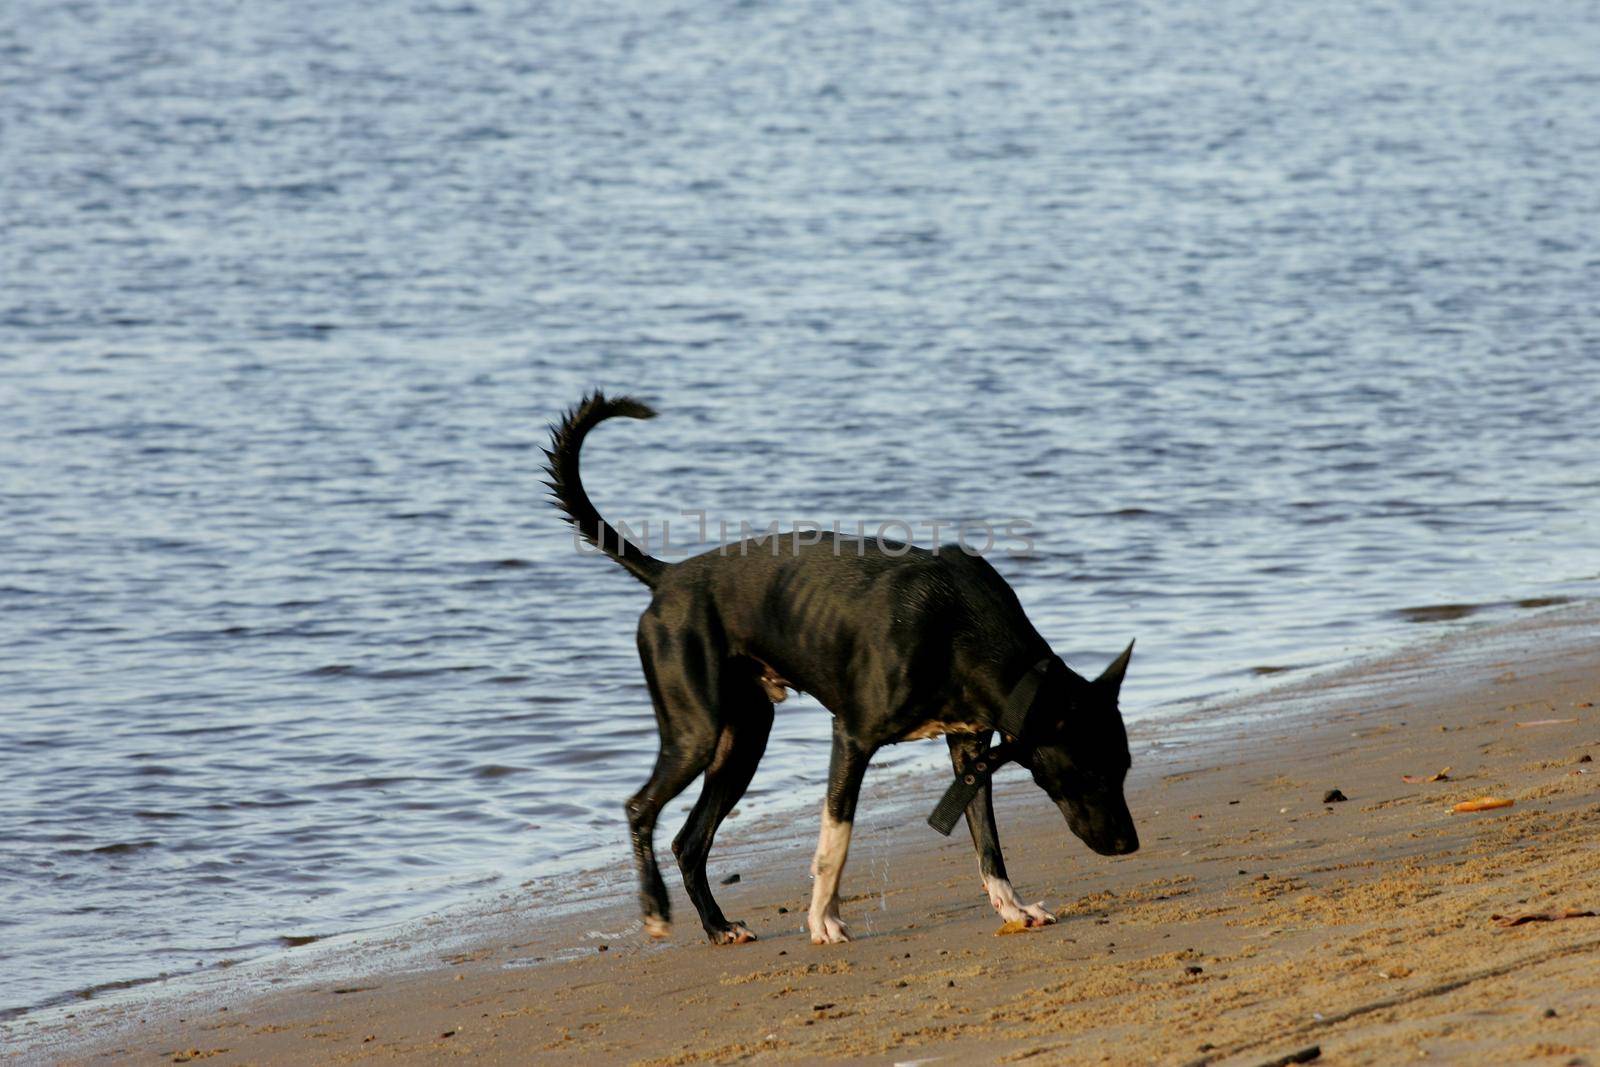 salvador, bahia / brazil - february 25, 2011: dog is seen on the beach sand in the city of Salvador.